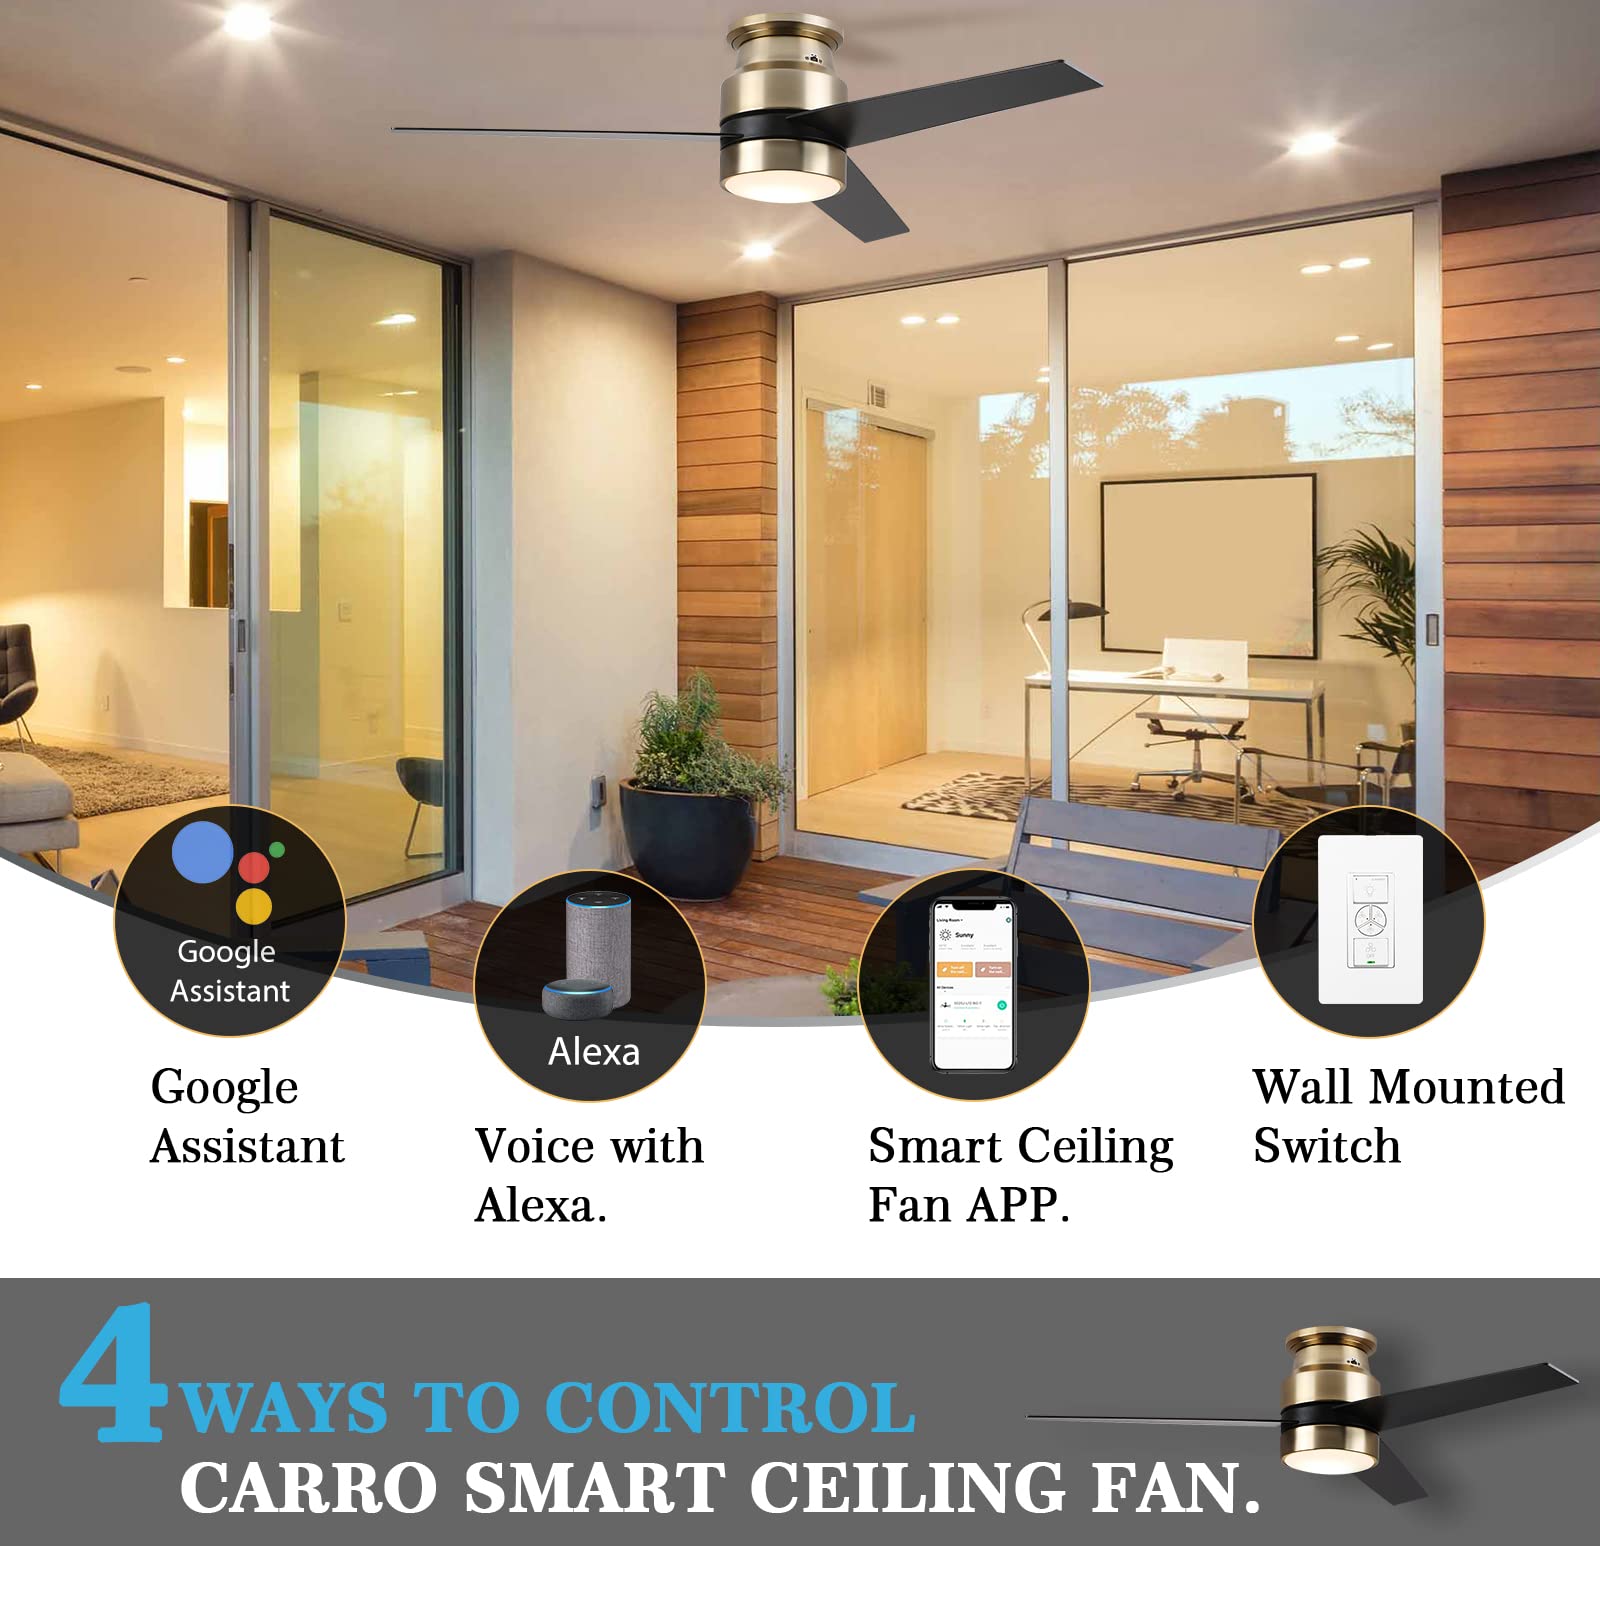 Carro Low Profile Smart Ceiling Fan with Light, Work With Alexa/Google Home/Siri|Reversible Motor|Schedule| Needs Neutral Wire, No Hub Required, 52 inch